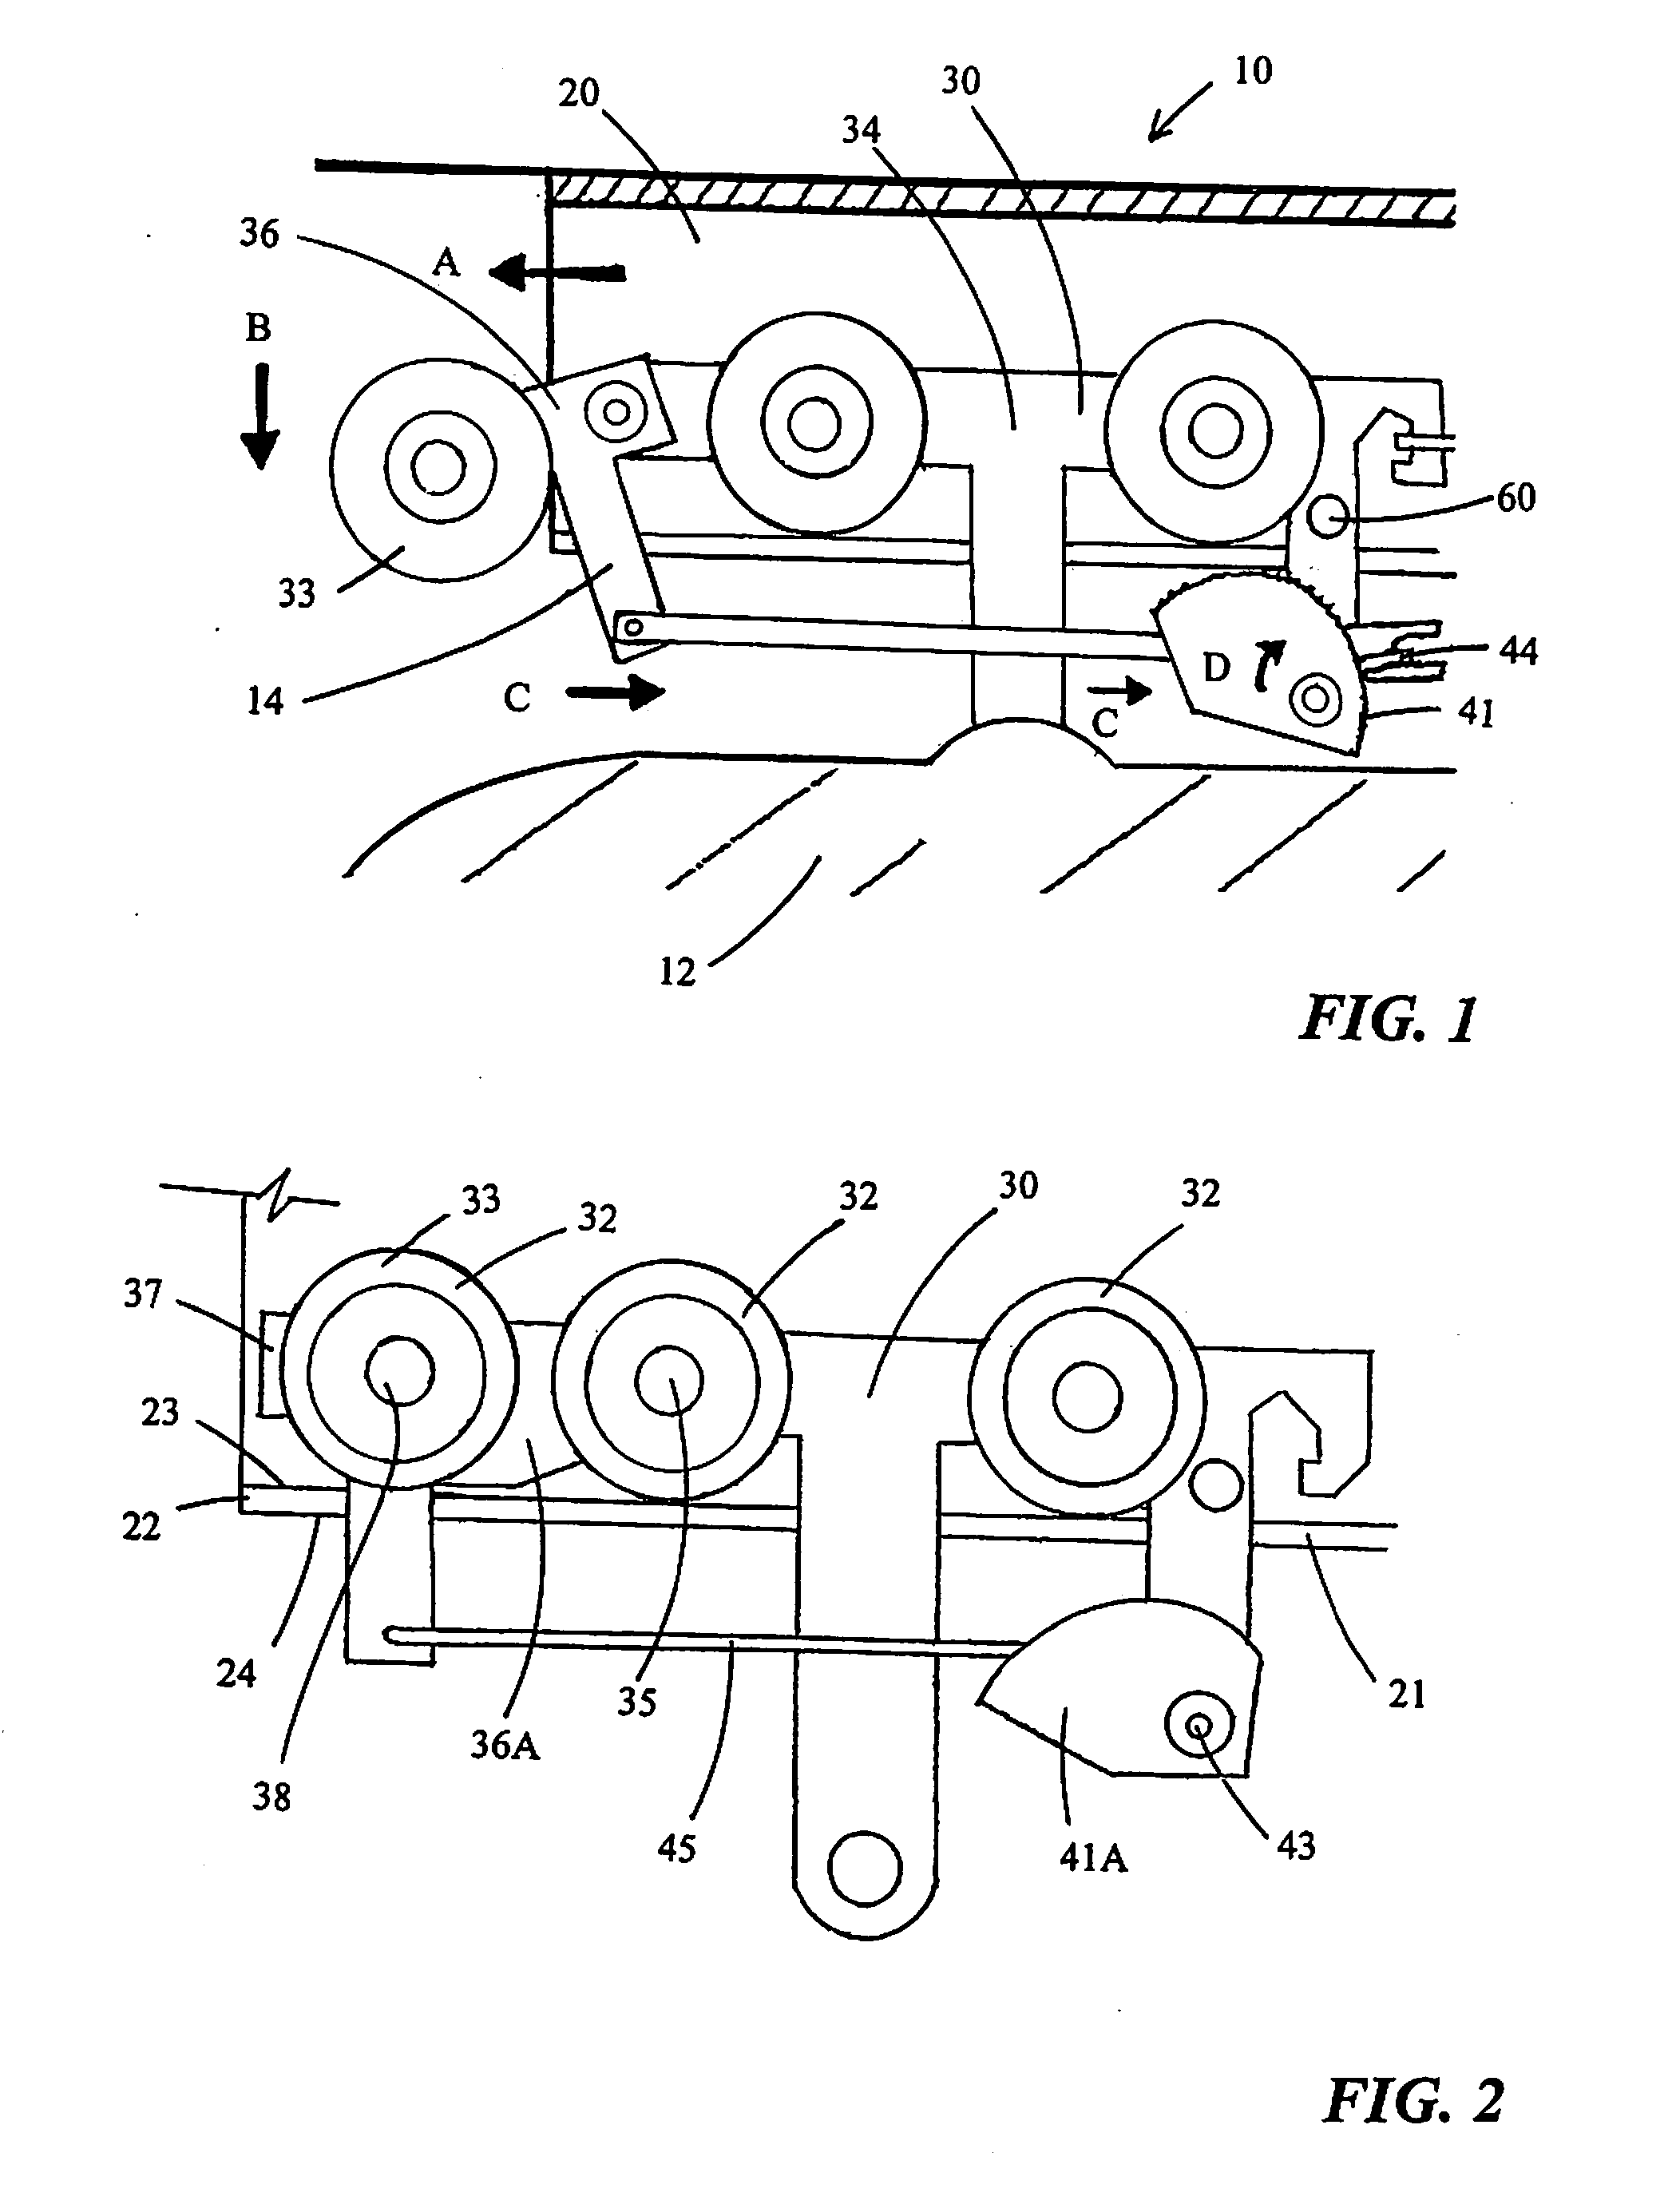 Locking Safety Mechanism for Suspended Transport Apparatus